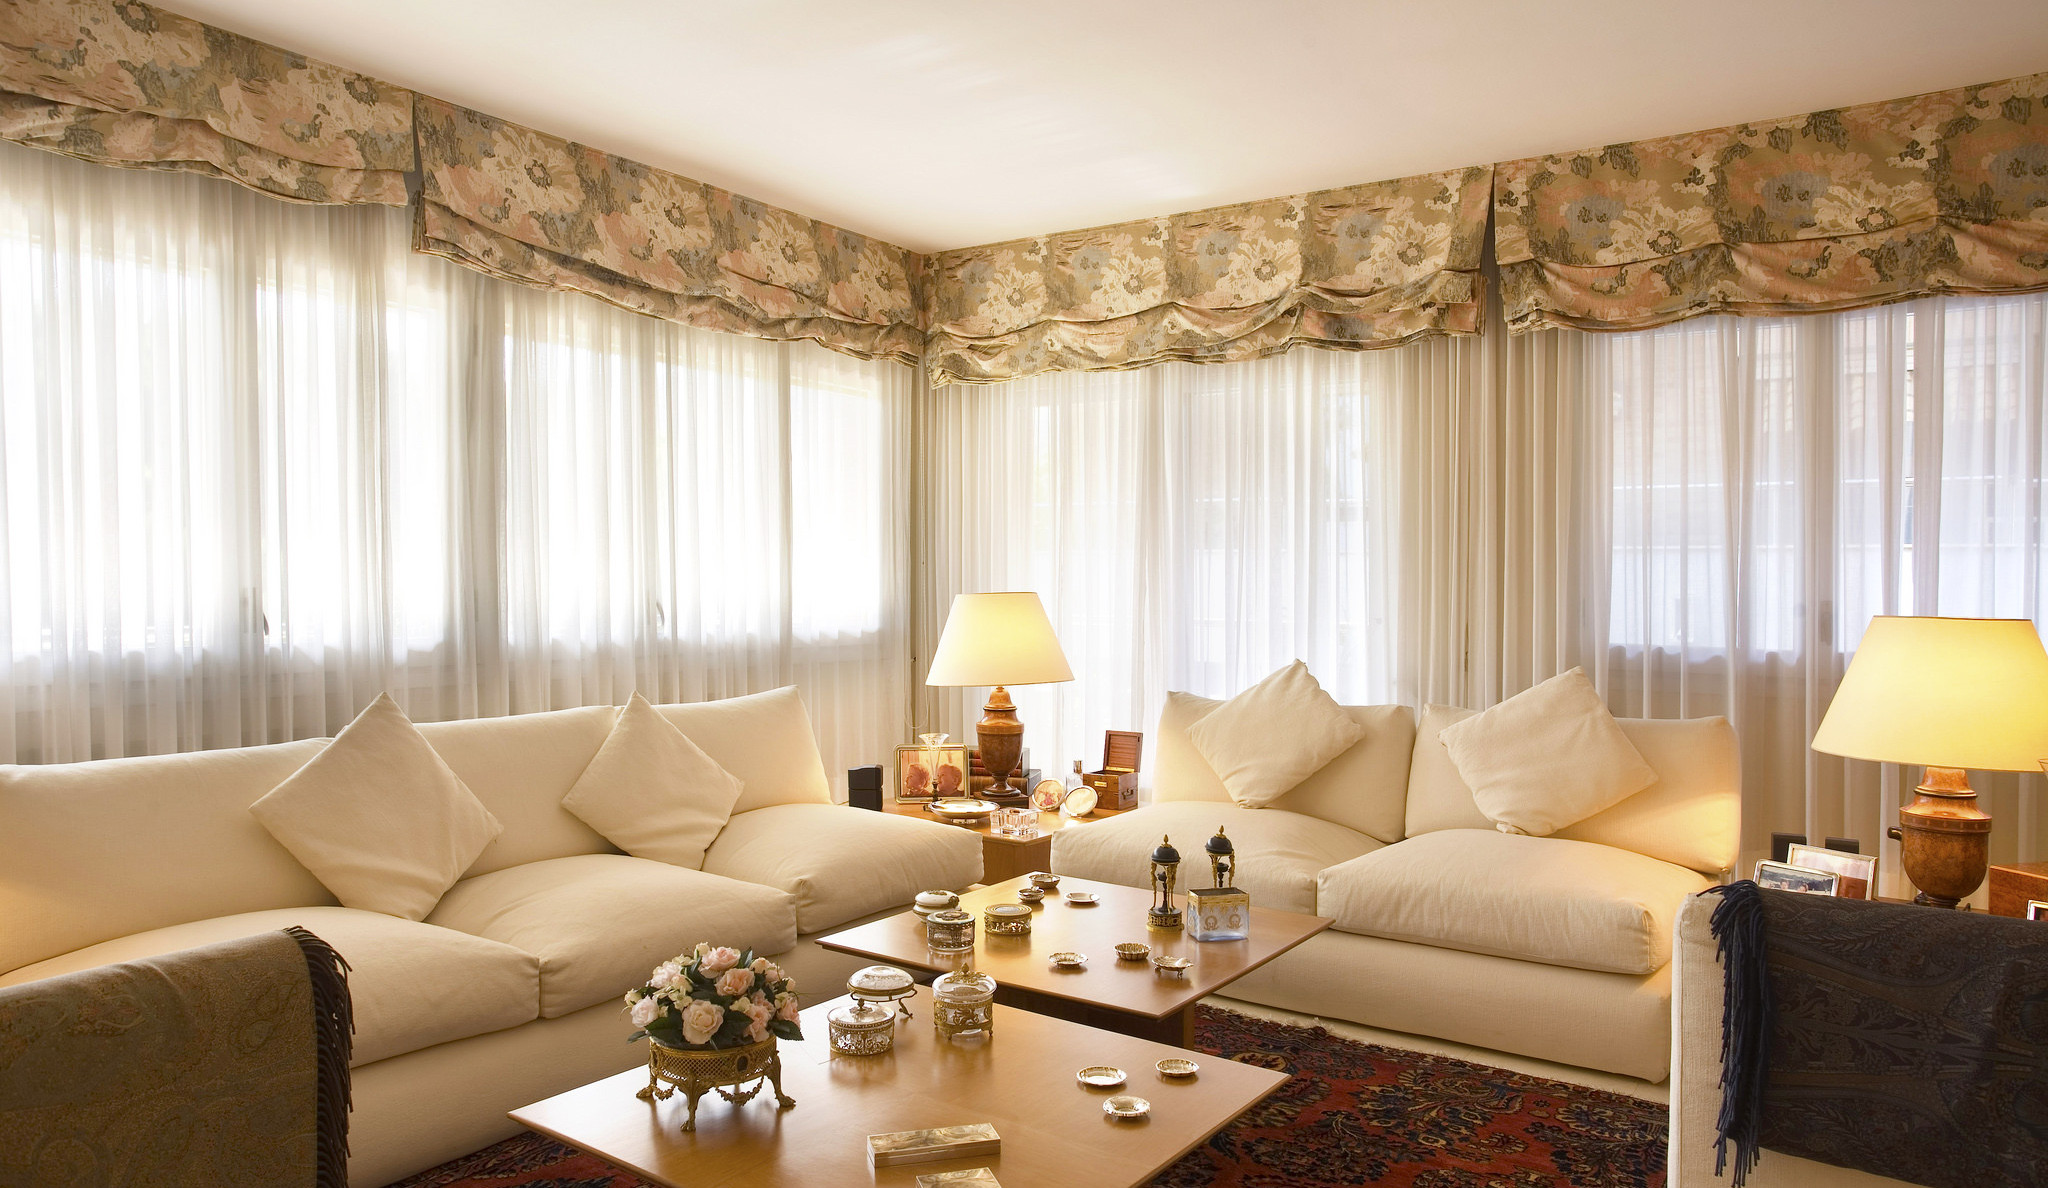 Living Room Curtains With Valances
 Tips for Choosing Living Room Curtain